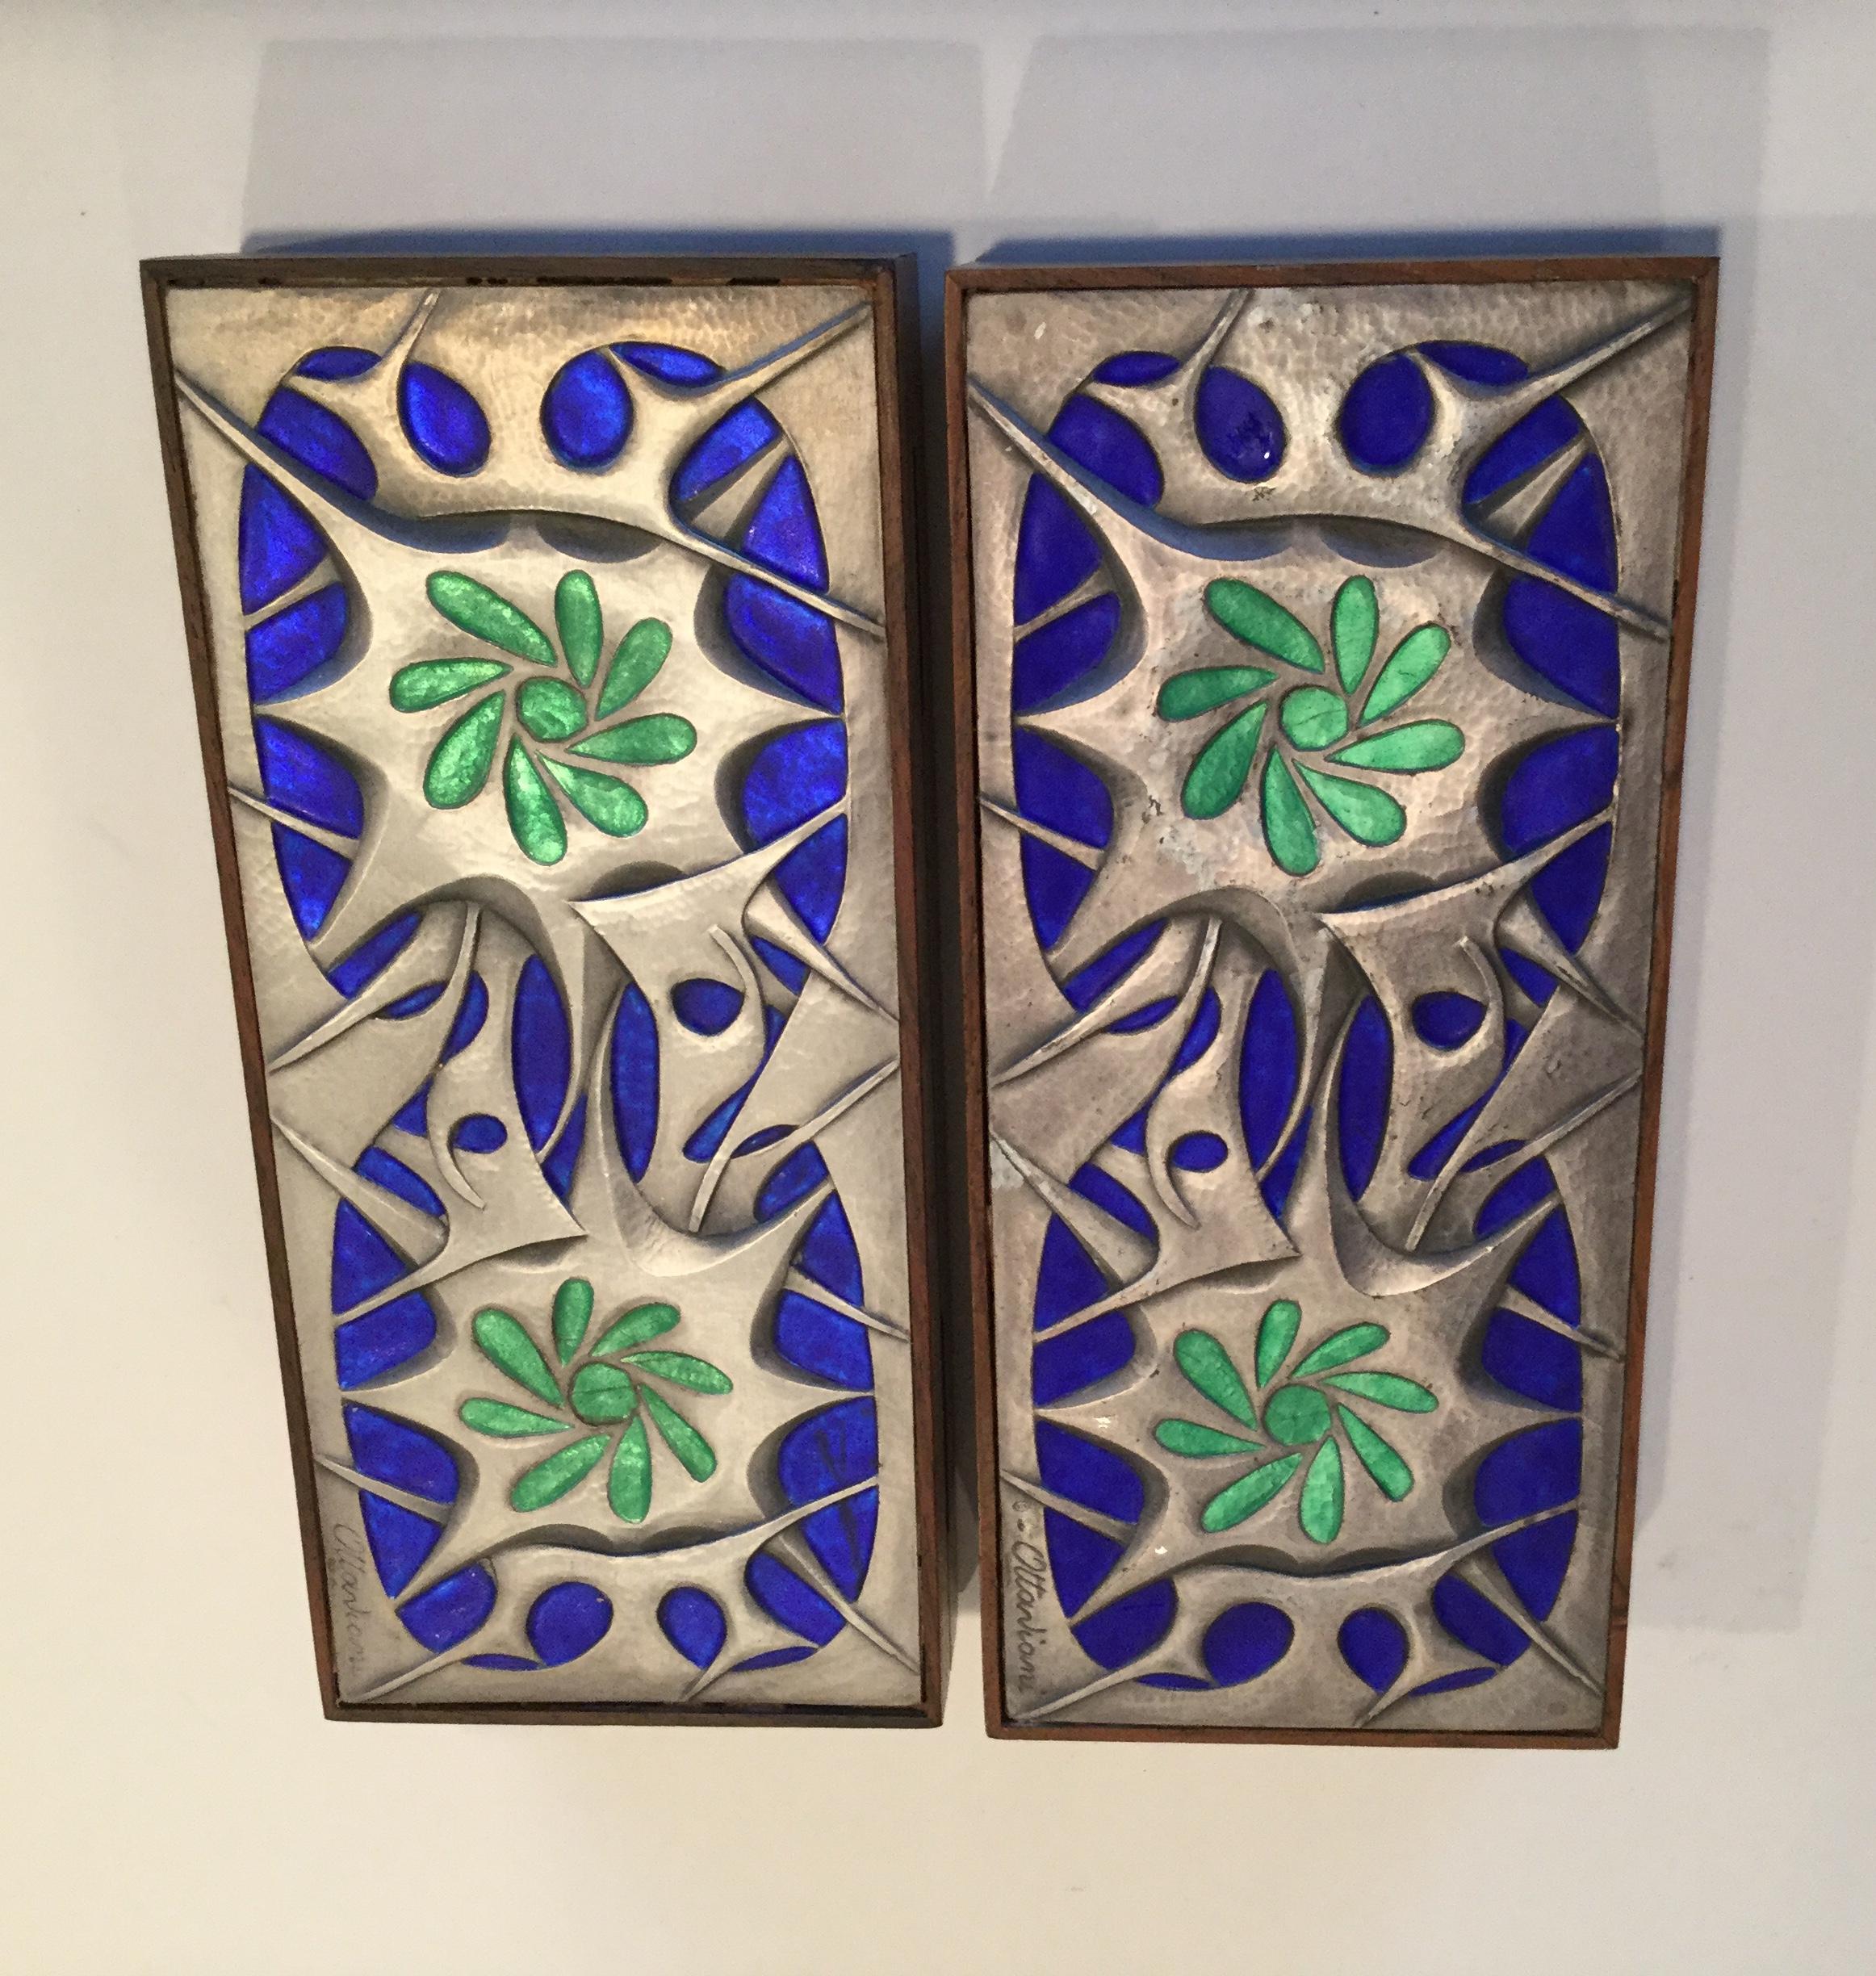 Amazing pair of geometric enamel, sterling, and wood boxes. Great for display.